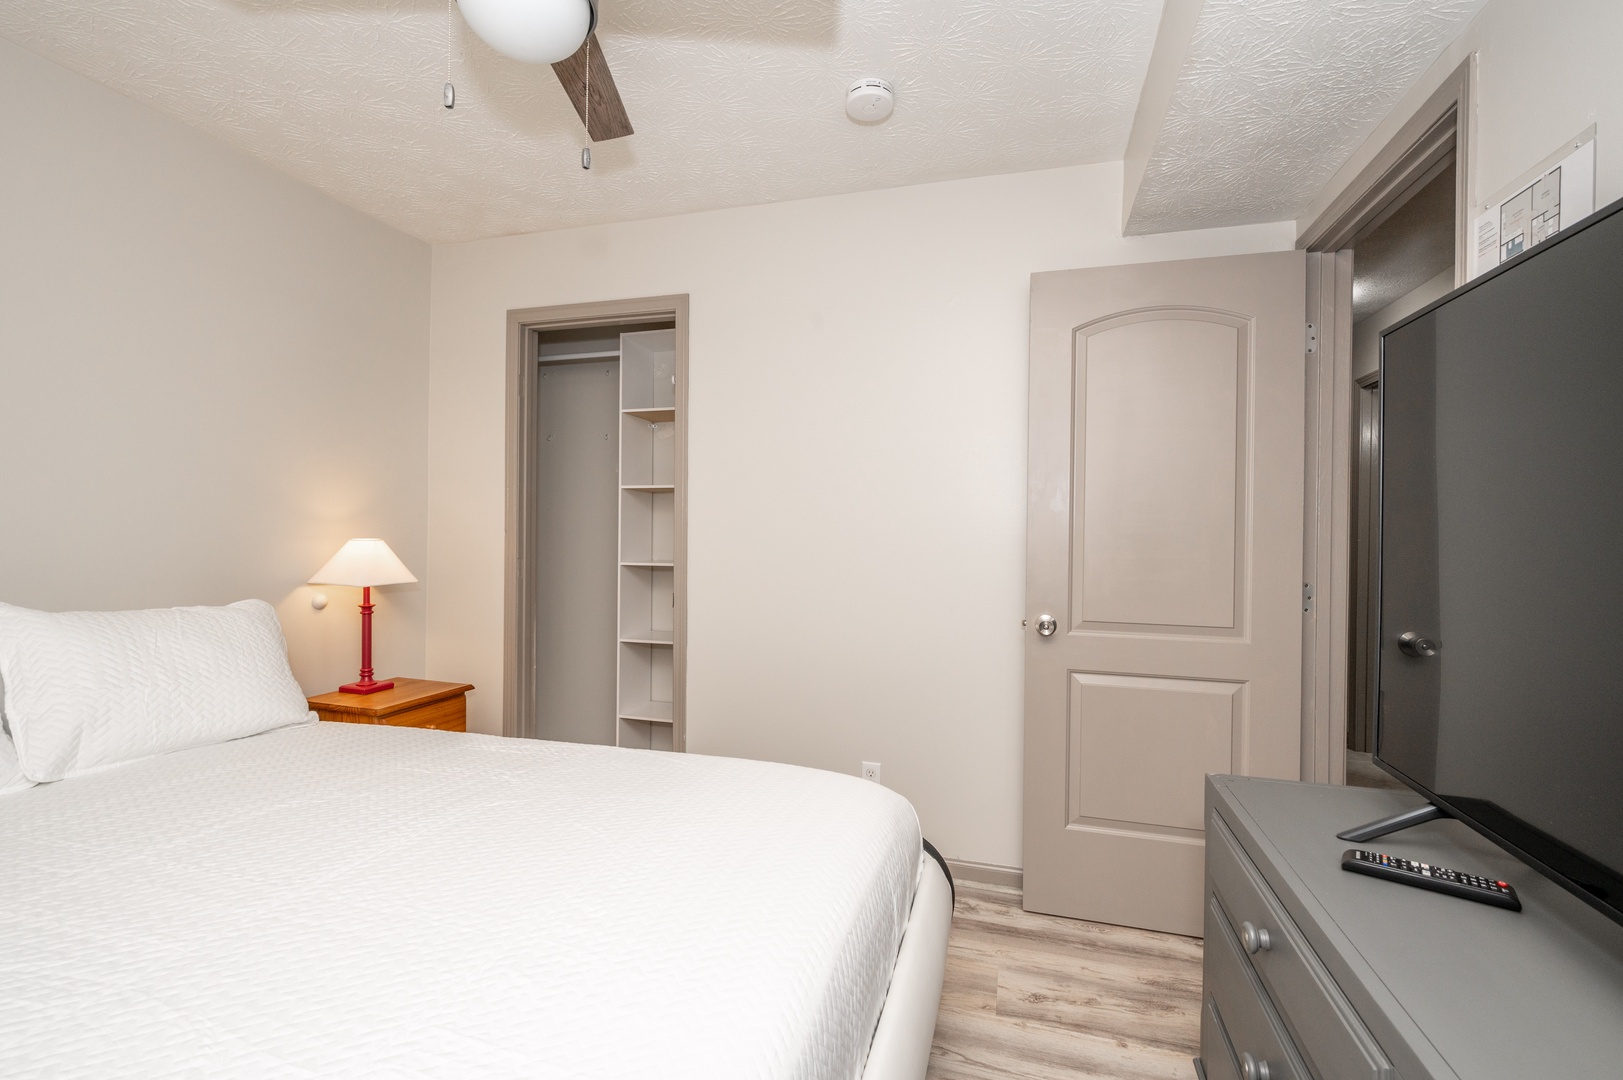 The second bedroom retreat offers a queen-sized bed & Smart TV